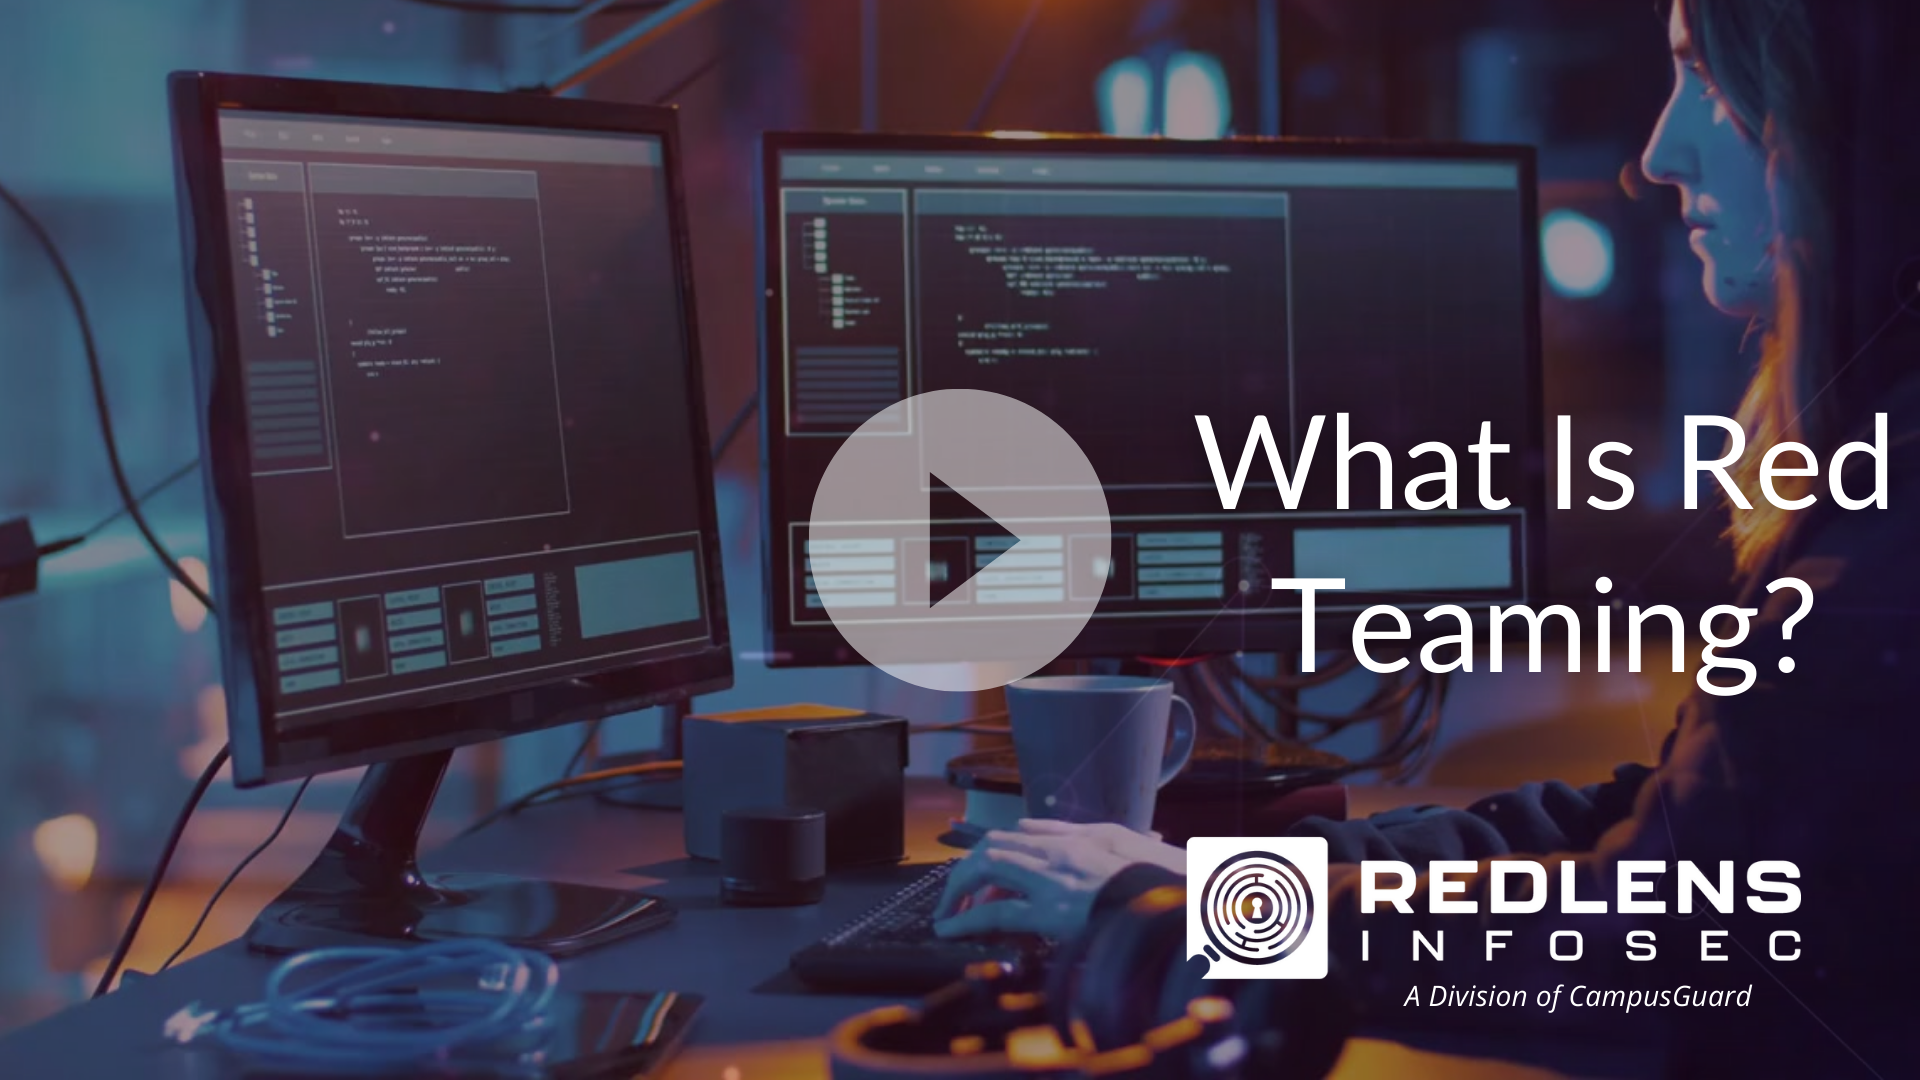 Red Teaming Video